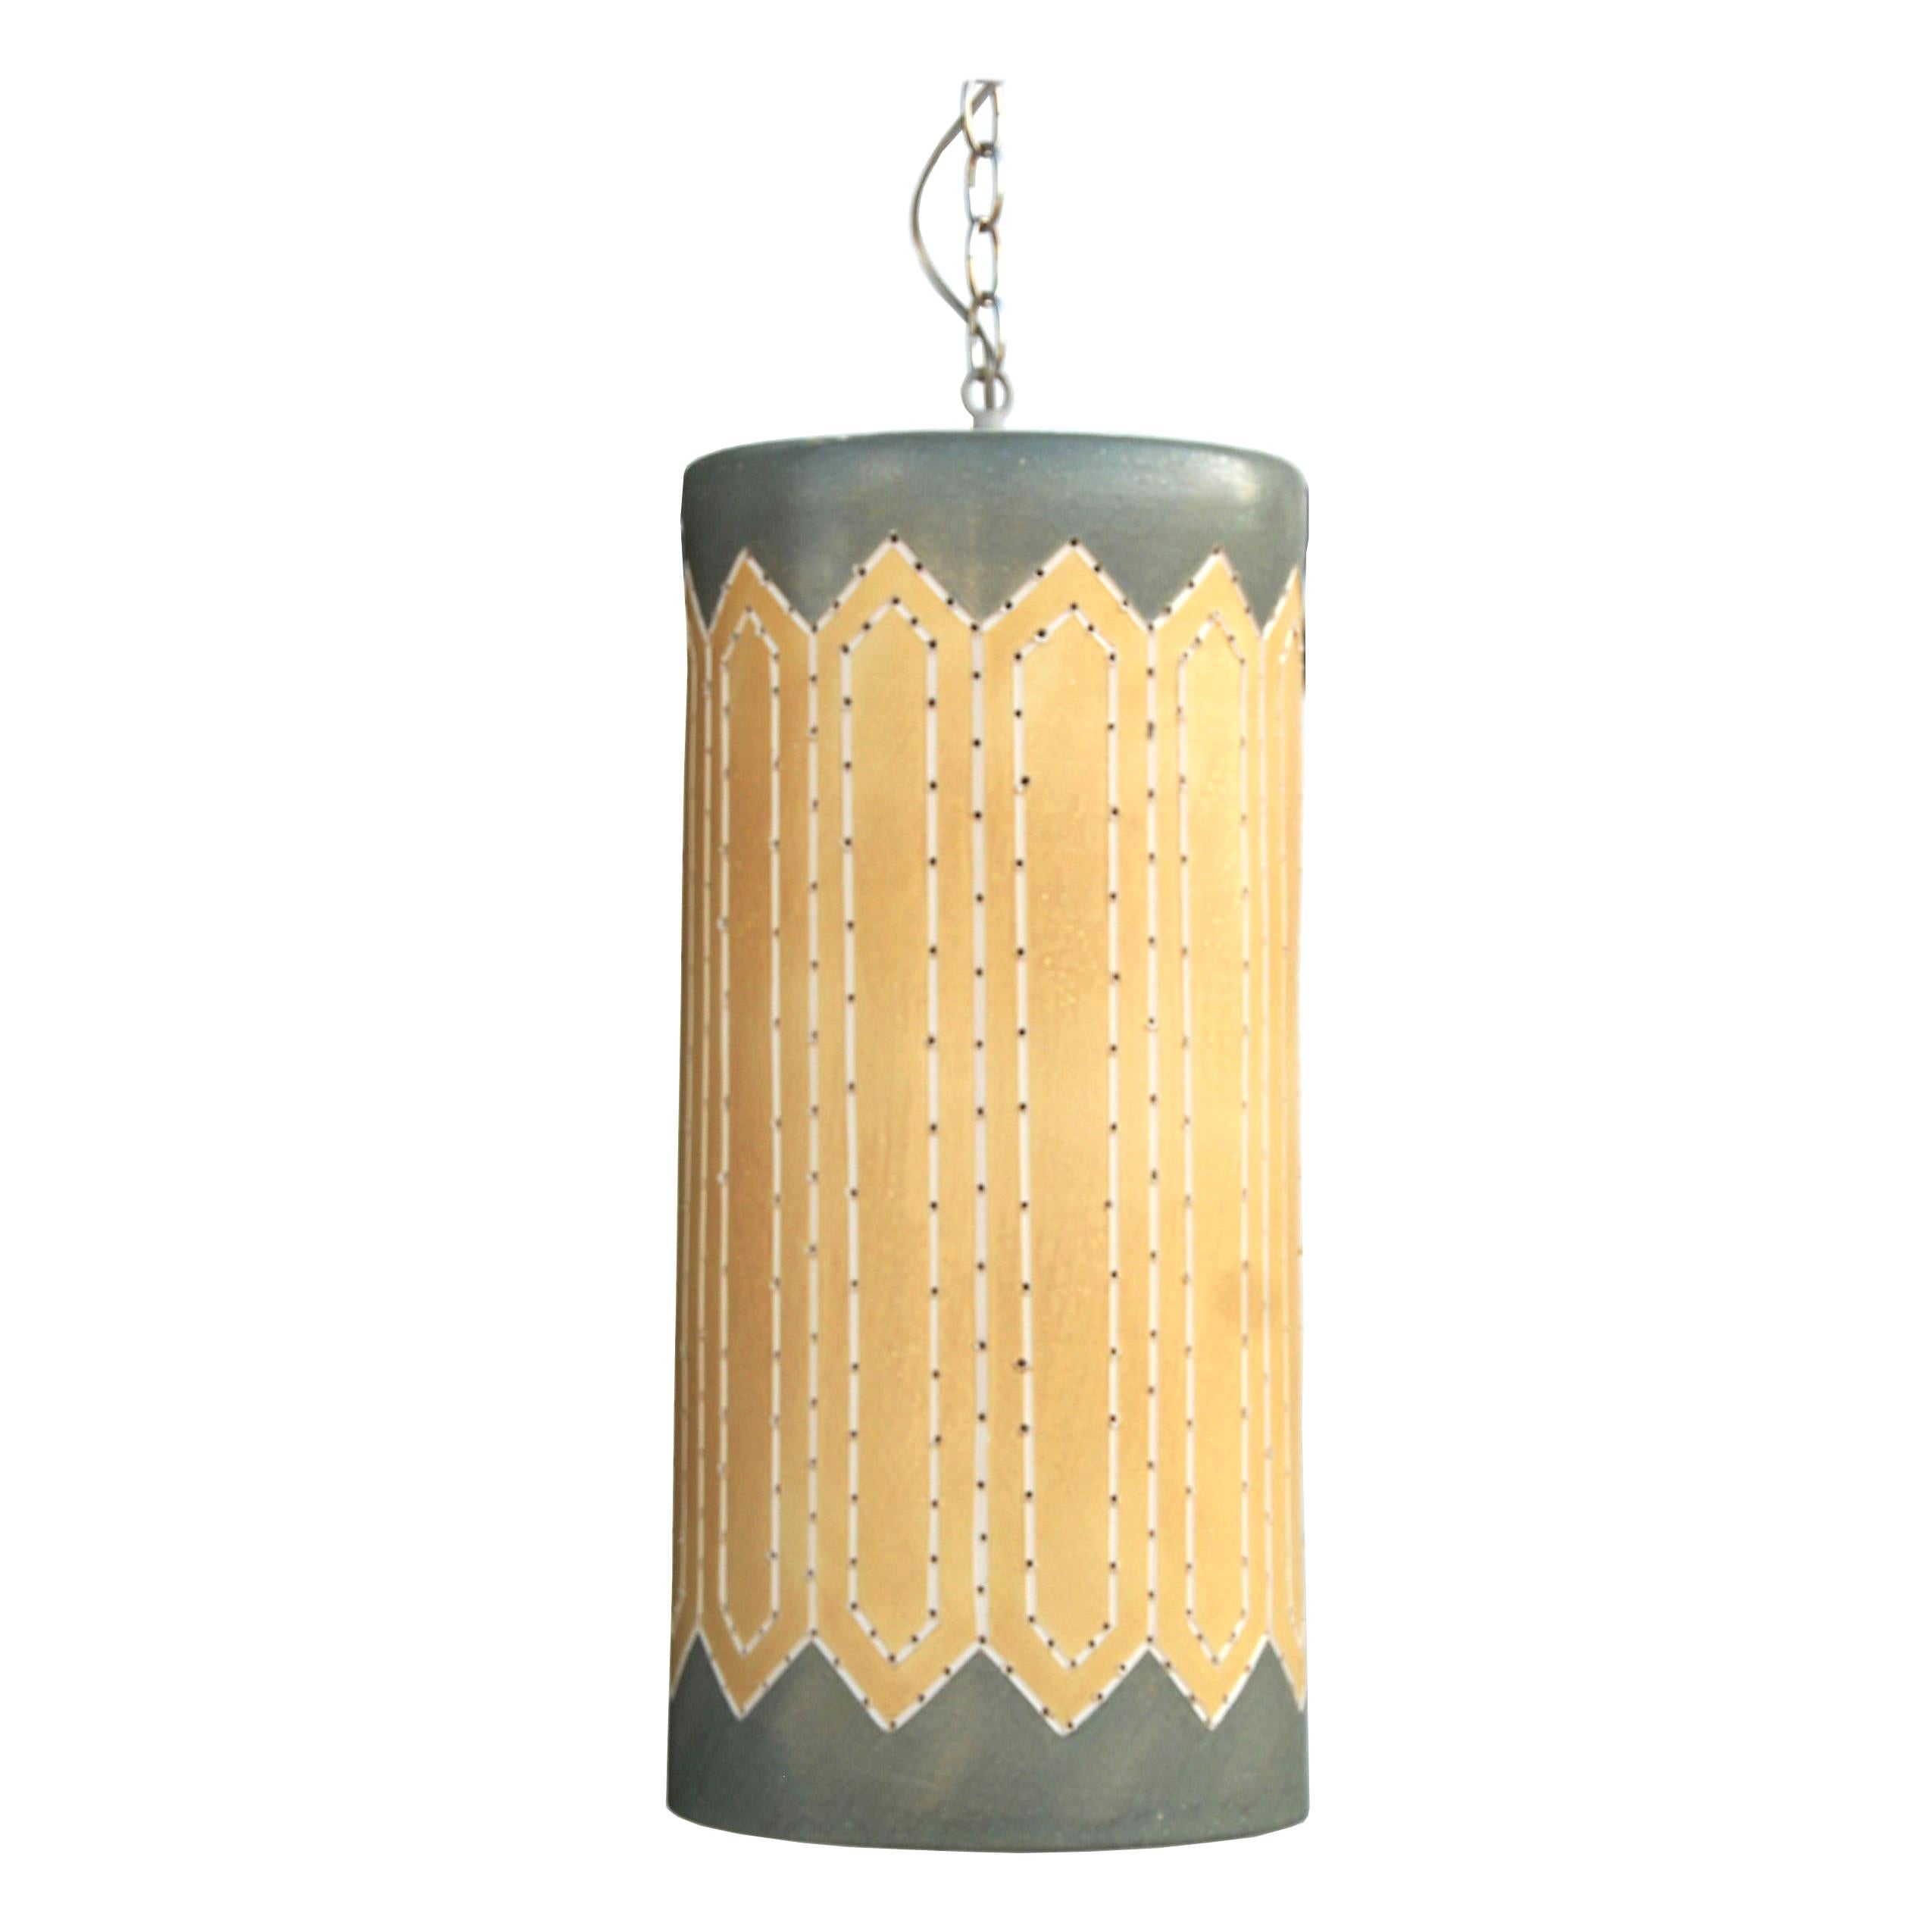 1 Midcentury Perforated Ceramic Pendant Lamp by Beaumont Mood